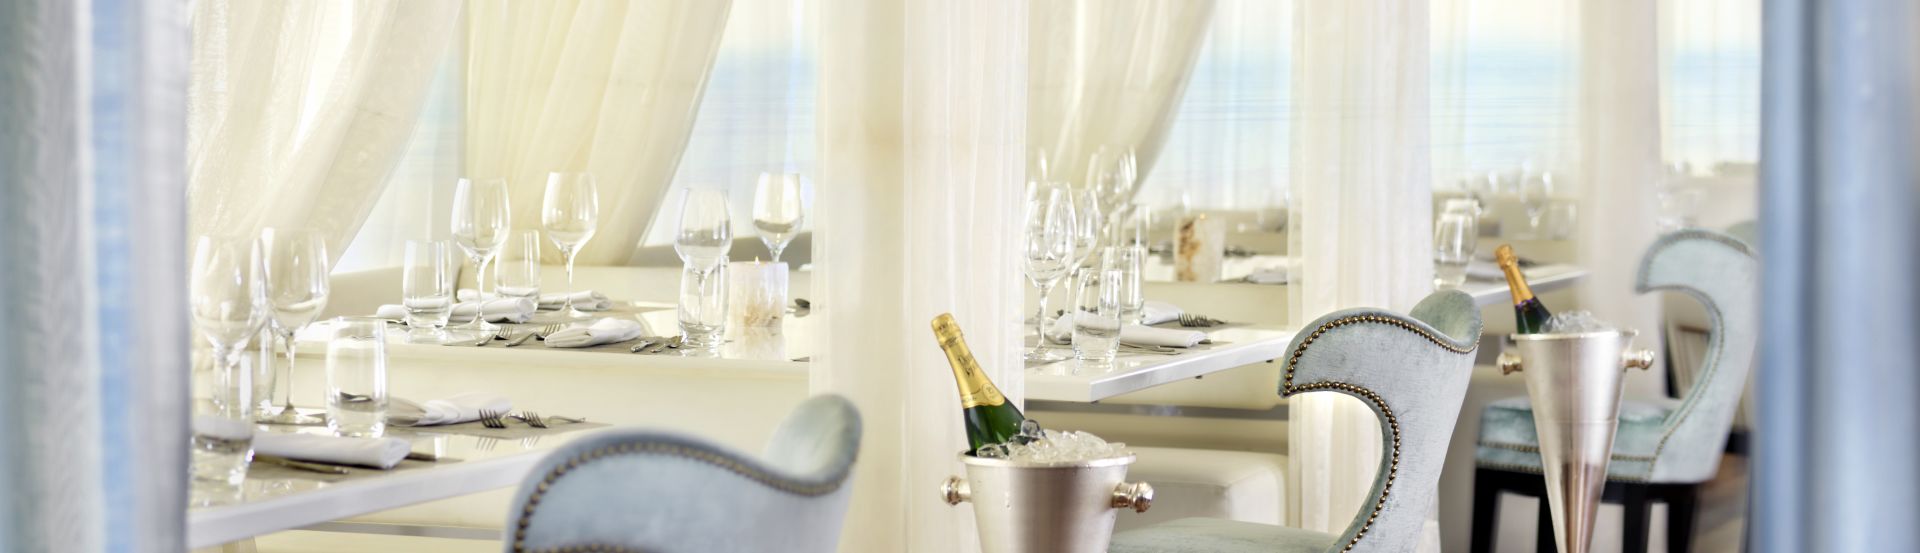 The Huntley Hotel ENJOY PACIFIC PANORAMAS, PERSONALIZED SERVICES, AND FINE DINING IN A VIBRANT...